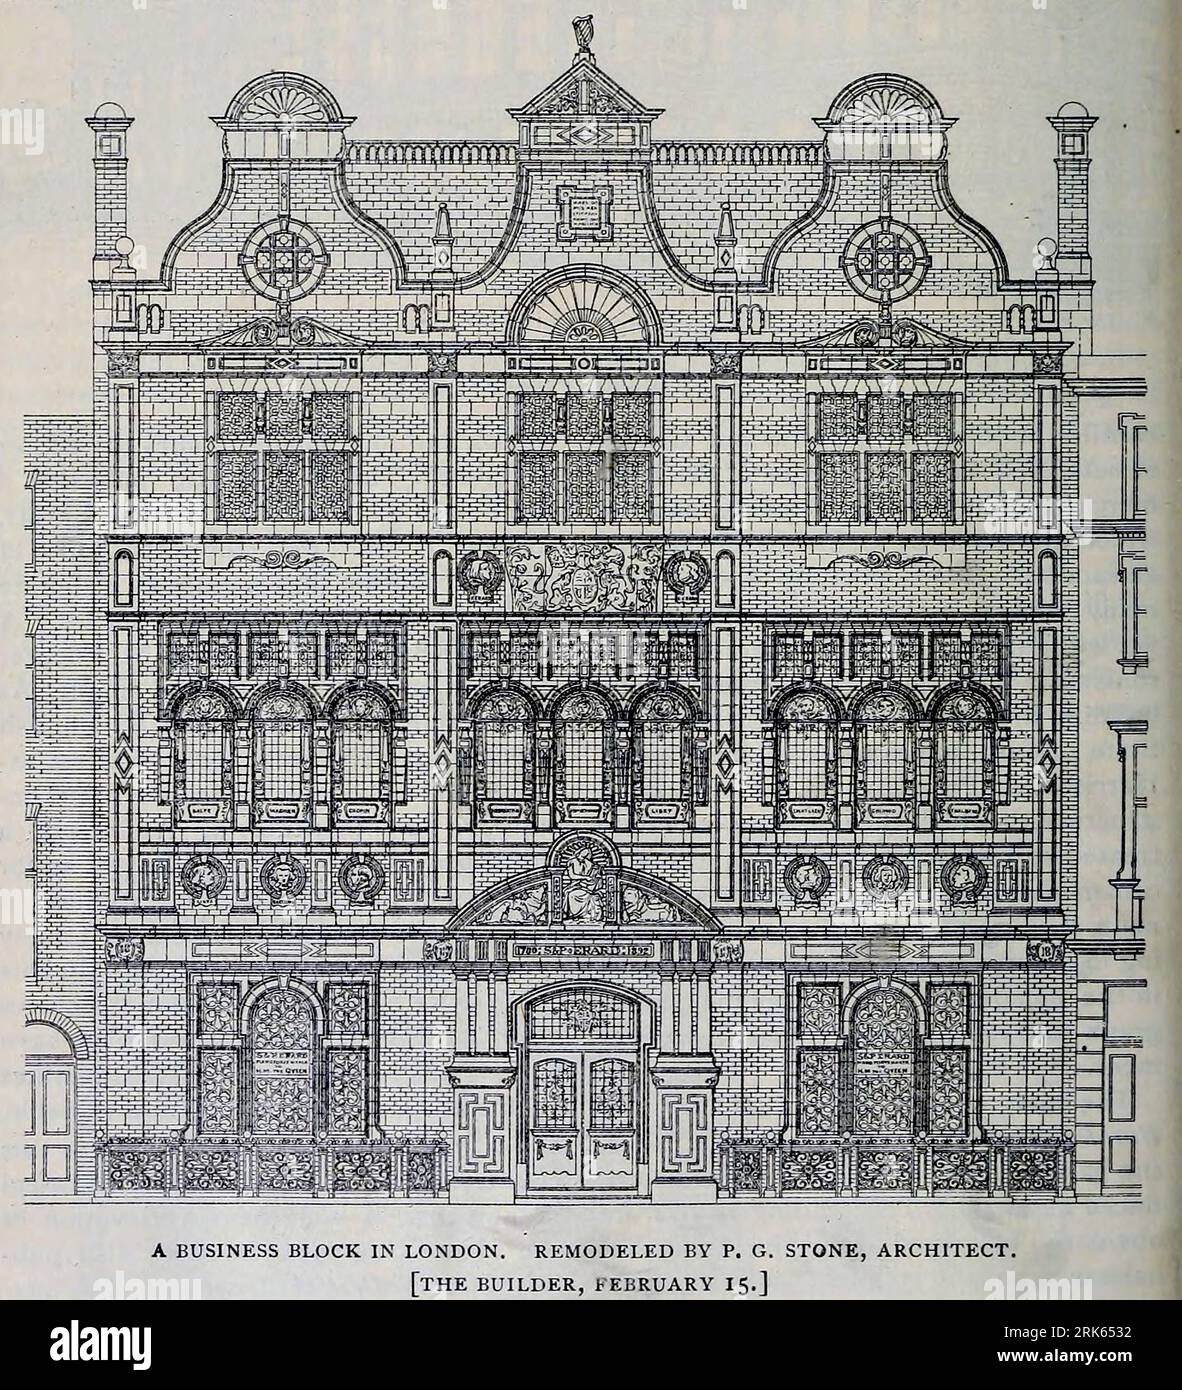 A BUSINESS BLOCK IN LONDON. REMODELED BY P. G. STONE, ARCHITECT. from the Article Architectural Review from The Engineering Magazine DEVOTED TO INDUSTRIAL PROGRESS Volume XI October 1896 NEW YORK The Engineering Magazine Co Stock Photo